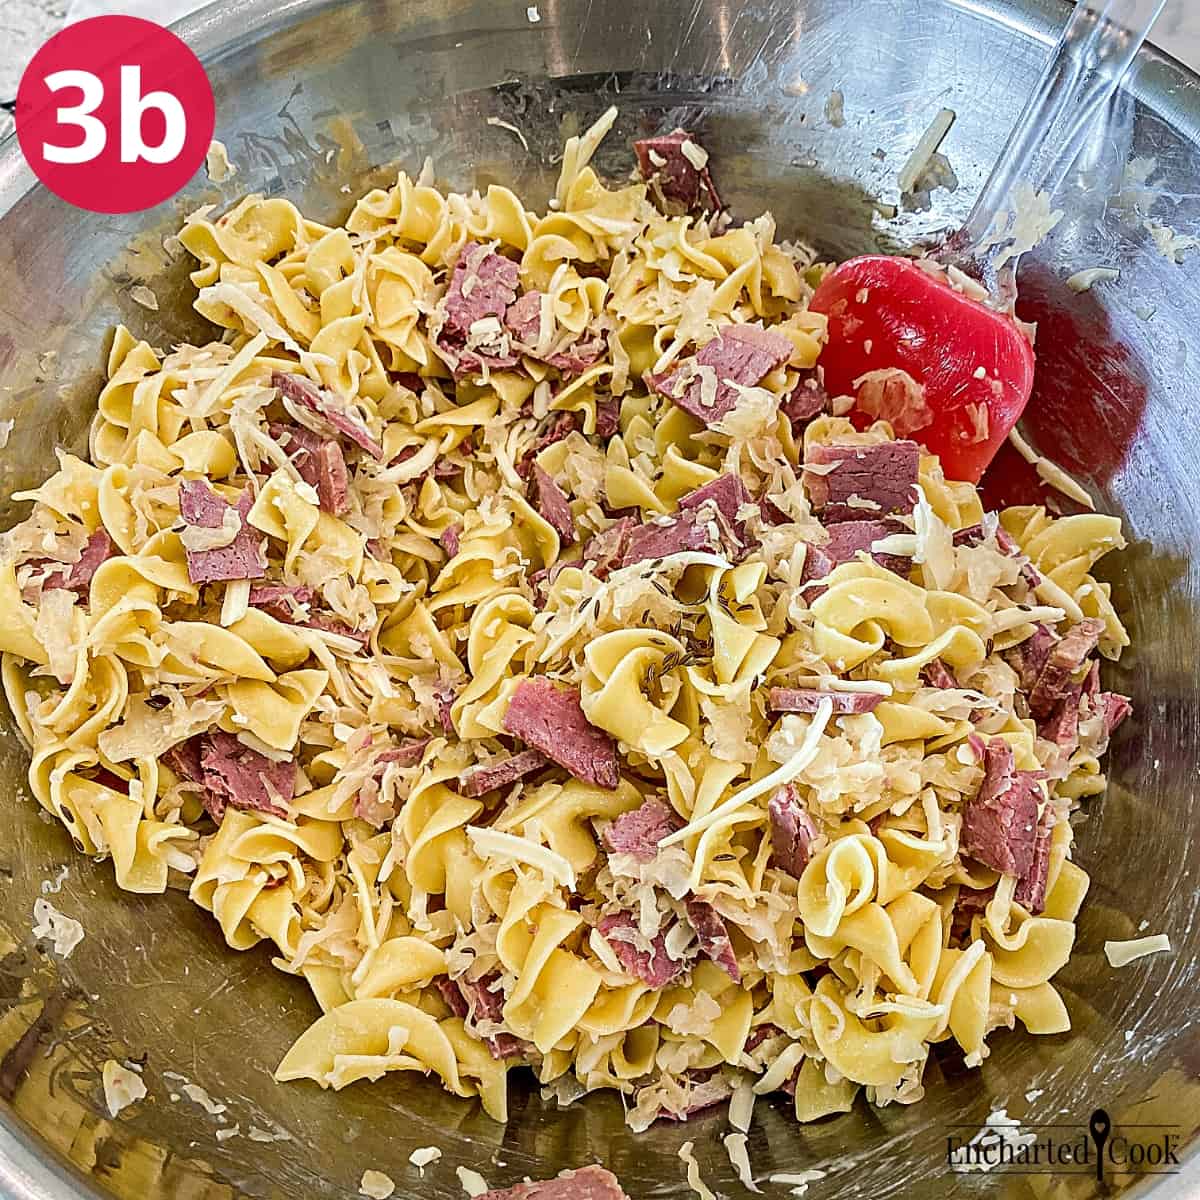 Process Photo 3b - Mixing corned beef, sauerkraut, shredded swiss cheese, and caraway seeds into the hot buttered noodles.